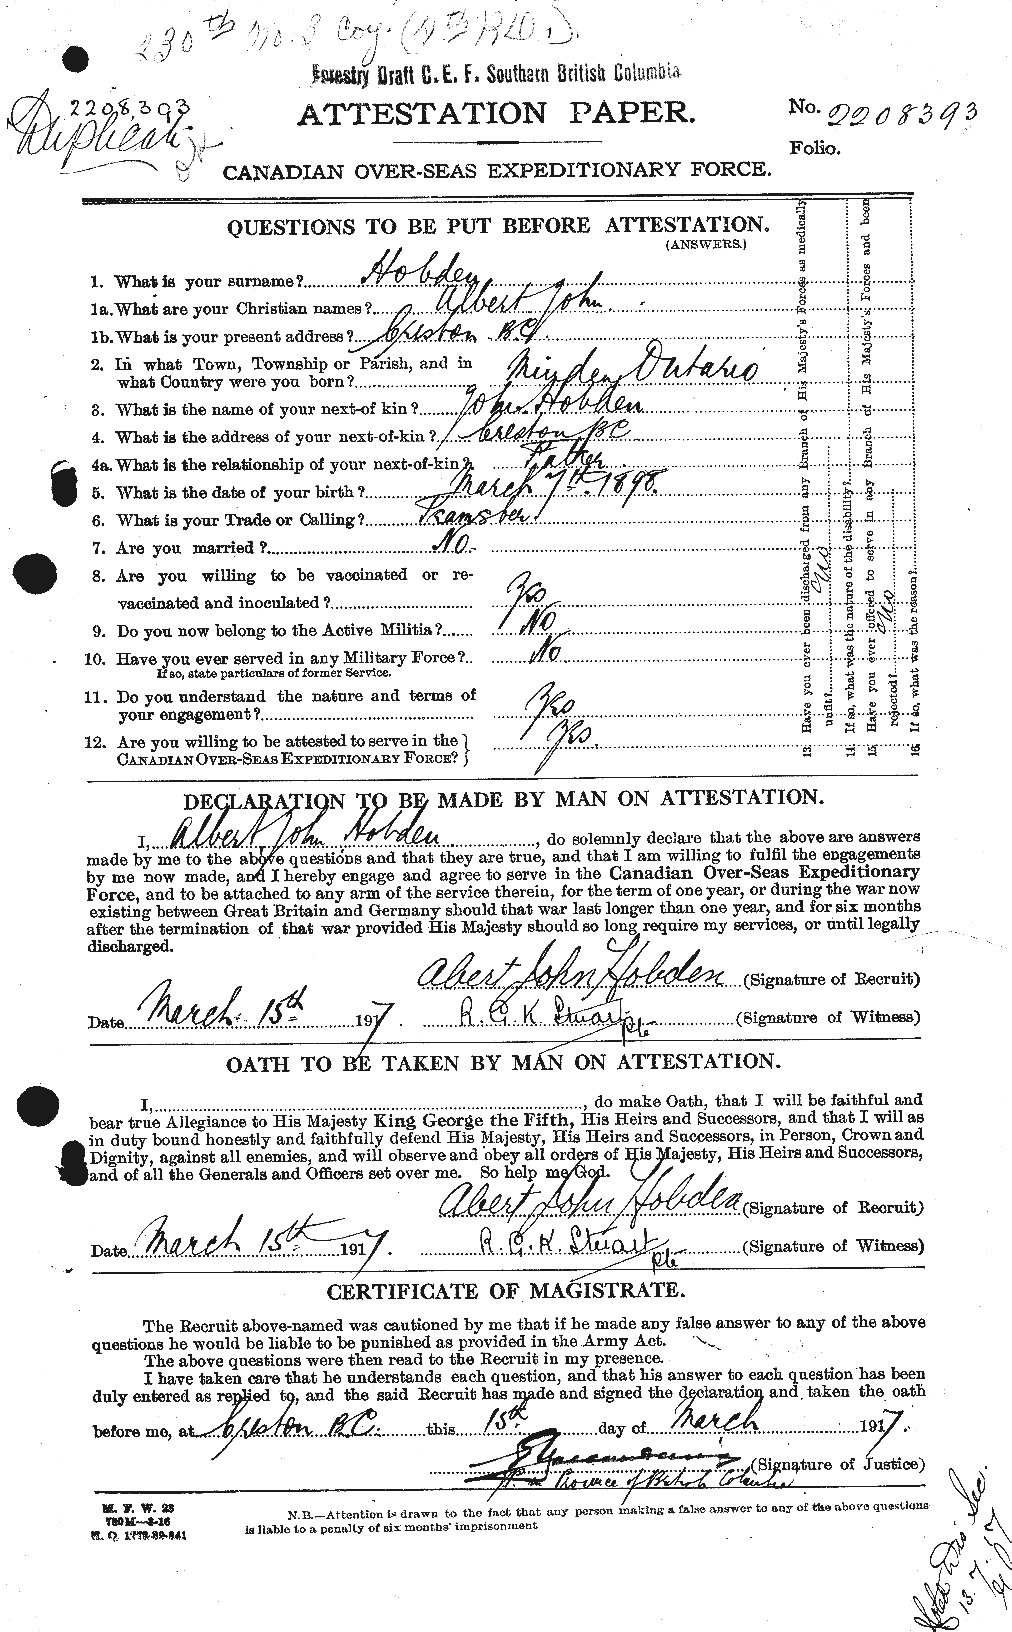 Personnel Records of the First World War - CEF 397533a